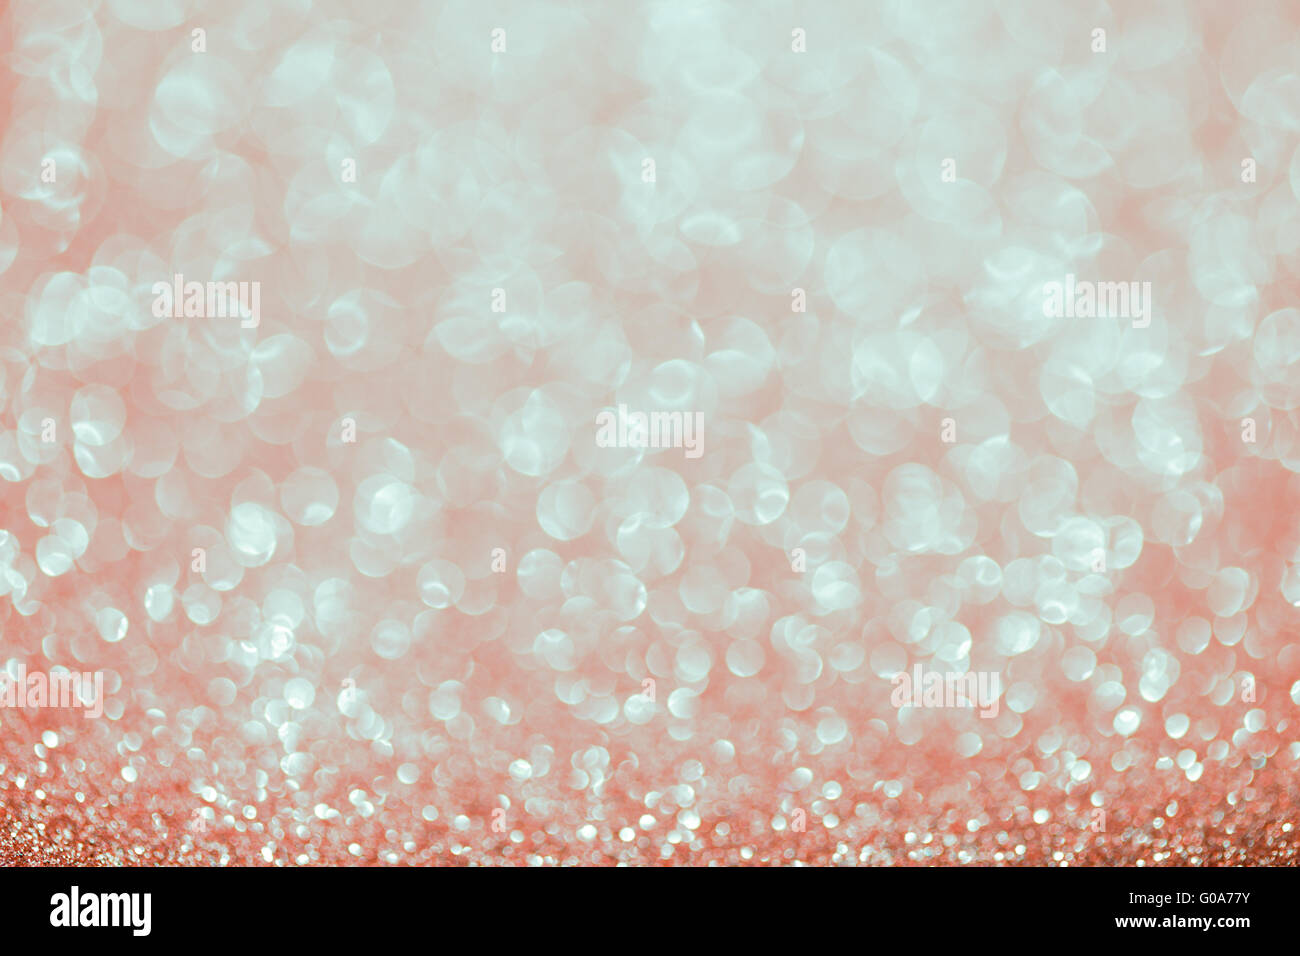 Beautiful festive abstract background with a small depth of field Stock Photo